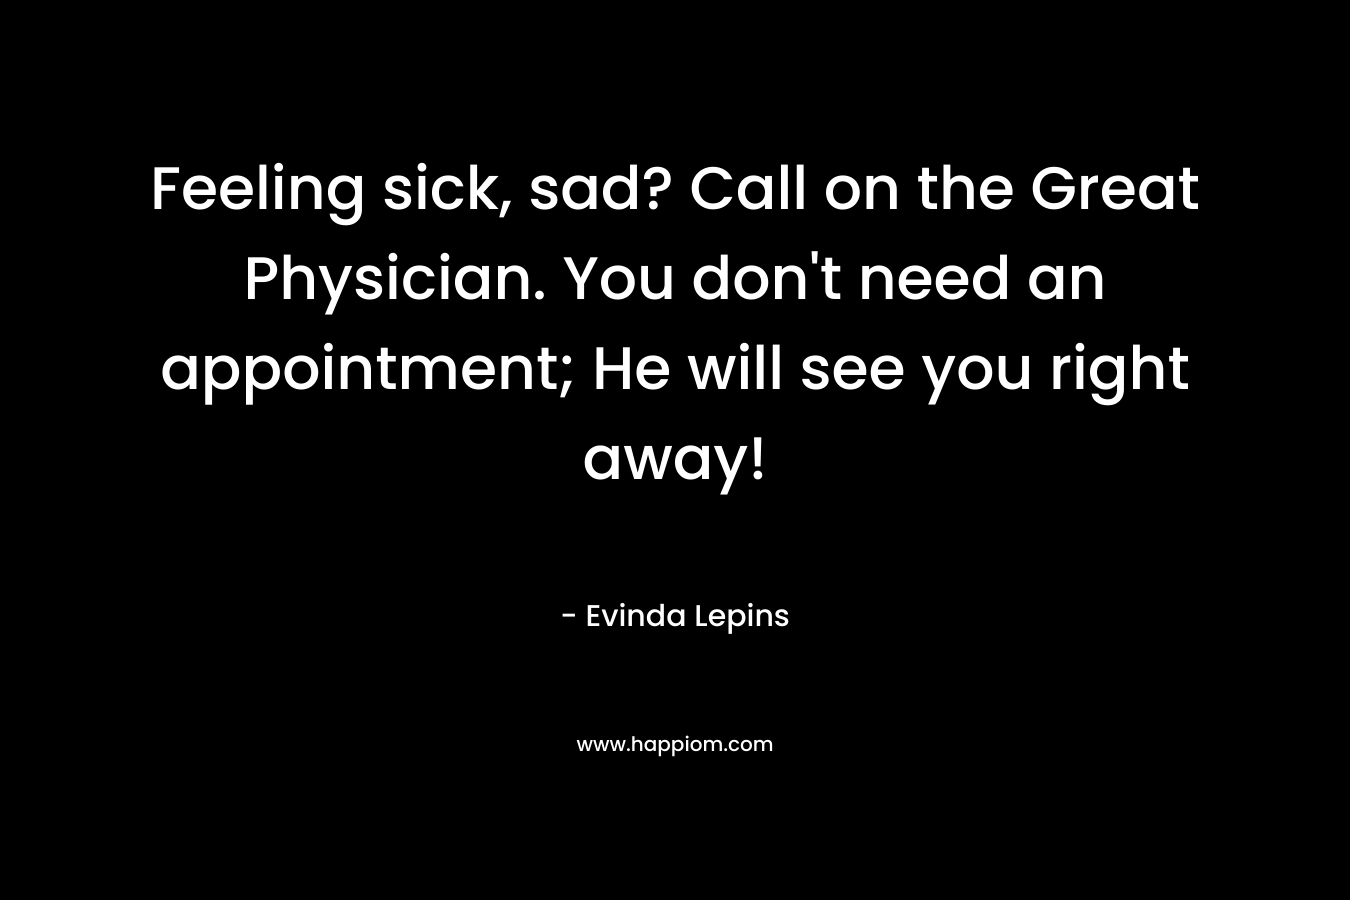 Feeling sick, sad? Call on the Great Physician. You don't need an appointment; He will see you right away!